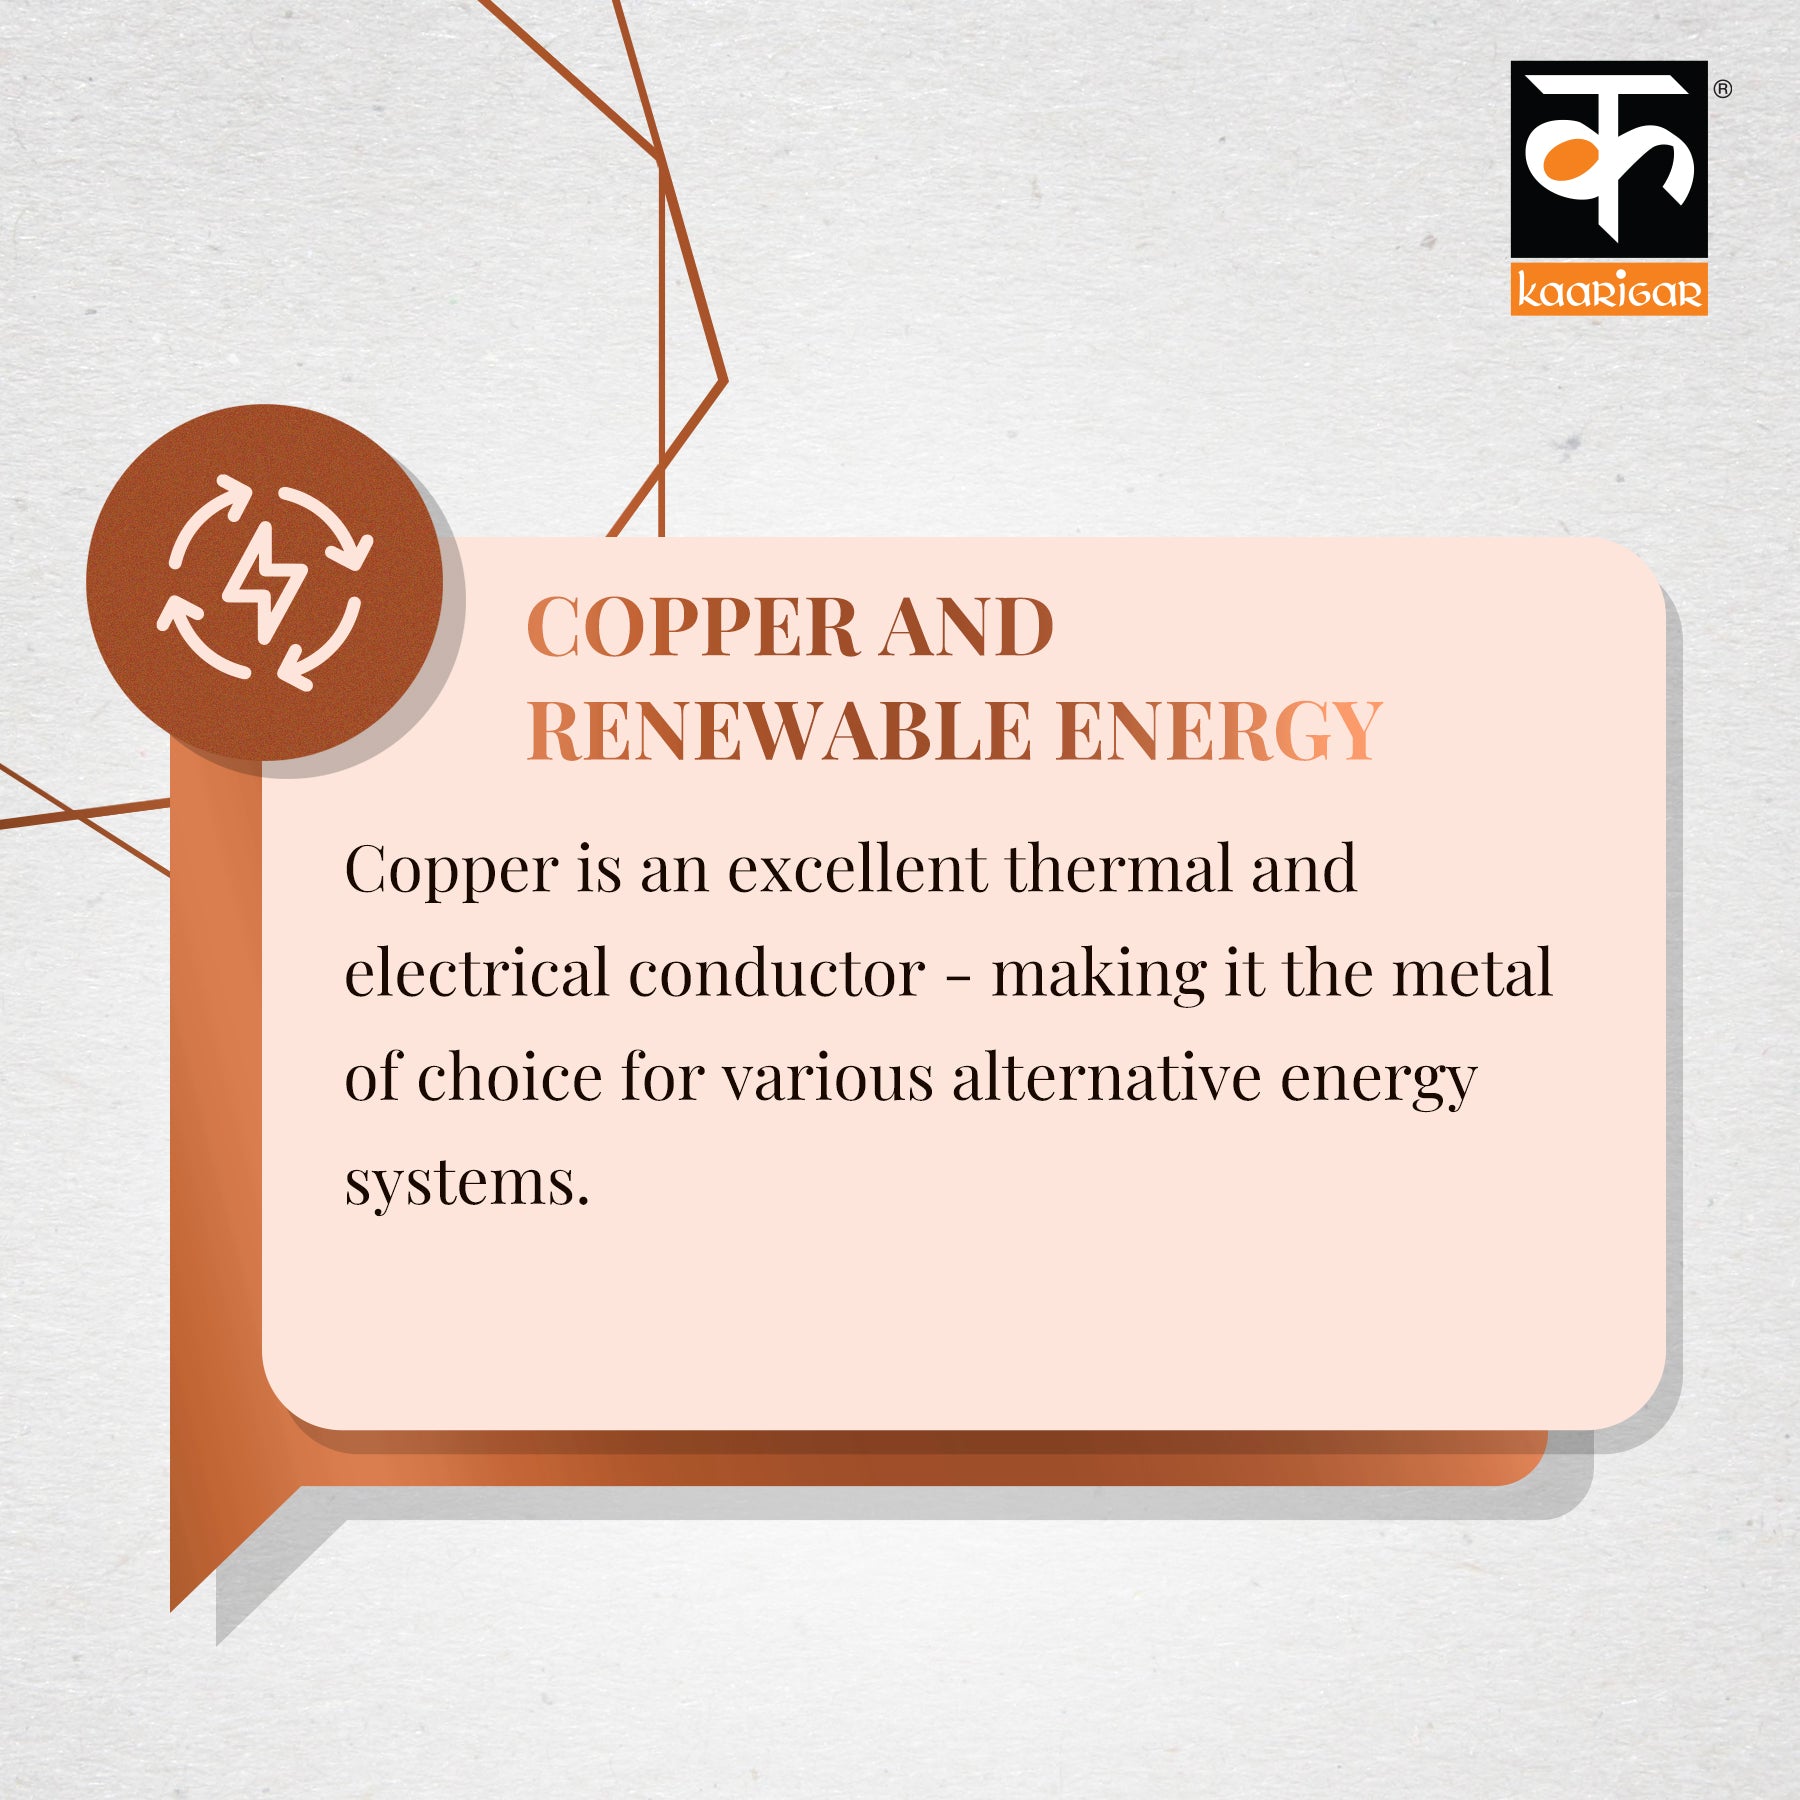 Copper and Renewable Energy